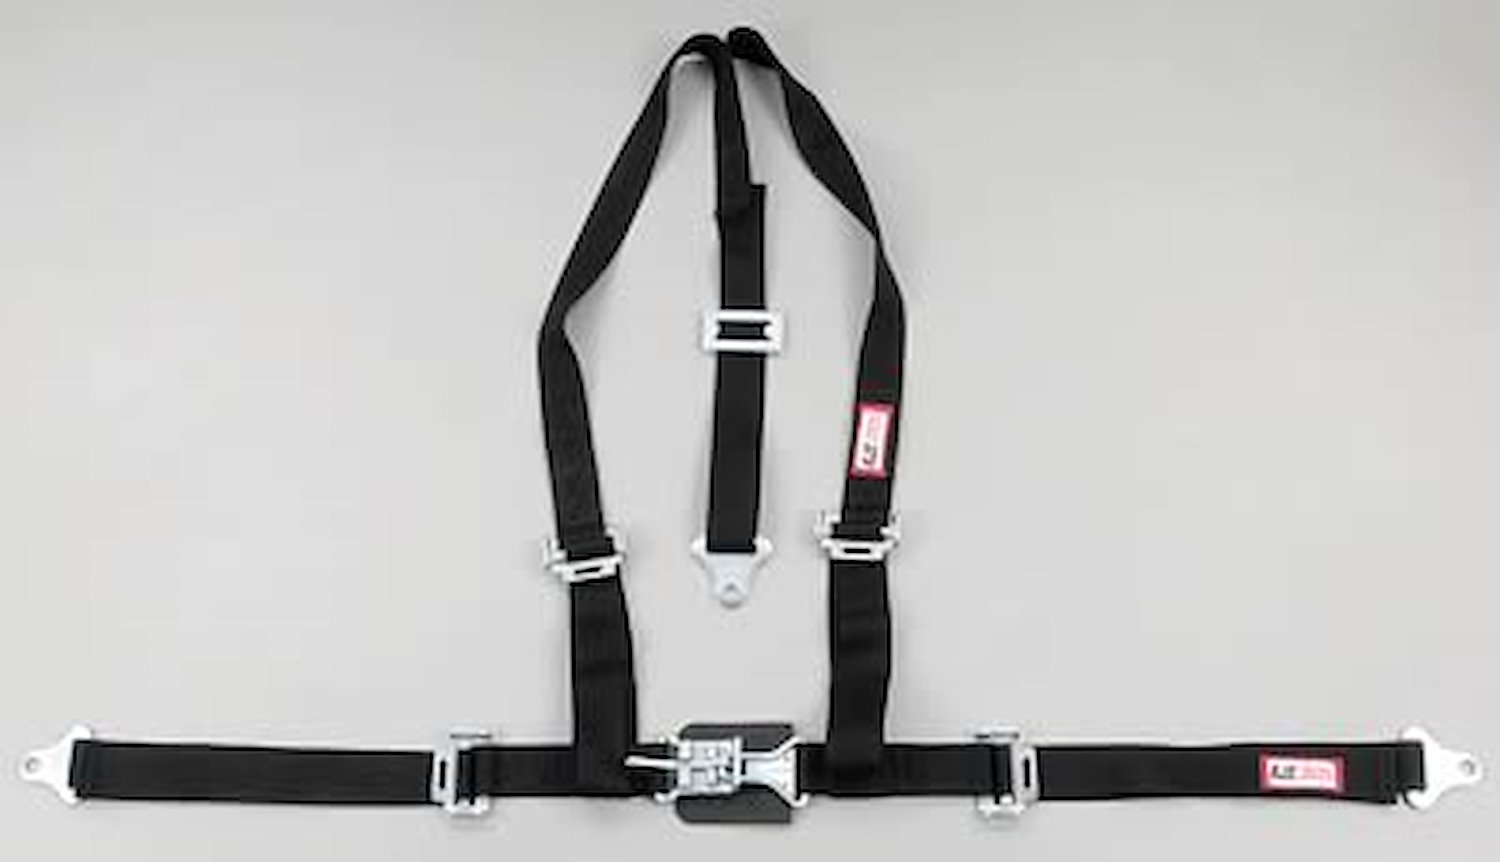 NON-SFI L&L HARNESS 2 PULL UP Lap Belt SNAP SEWN IN 2 S.H. Y FLOOR Mount WRAP/BOLT RED